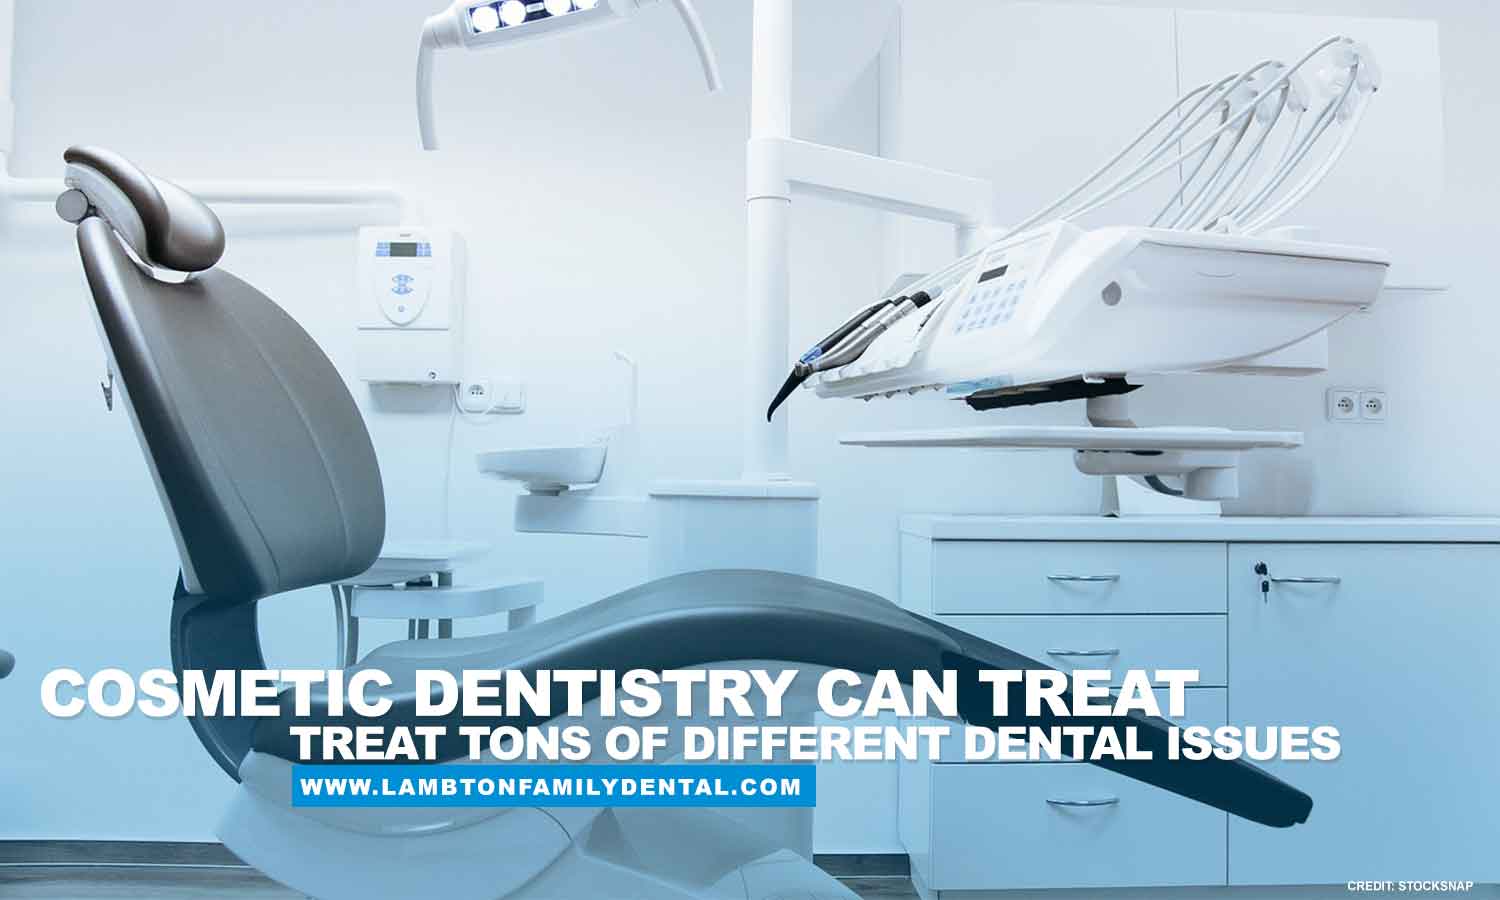 Cosmetic dentistry can treat tons of different dental issues